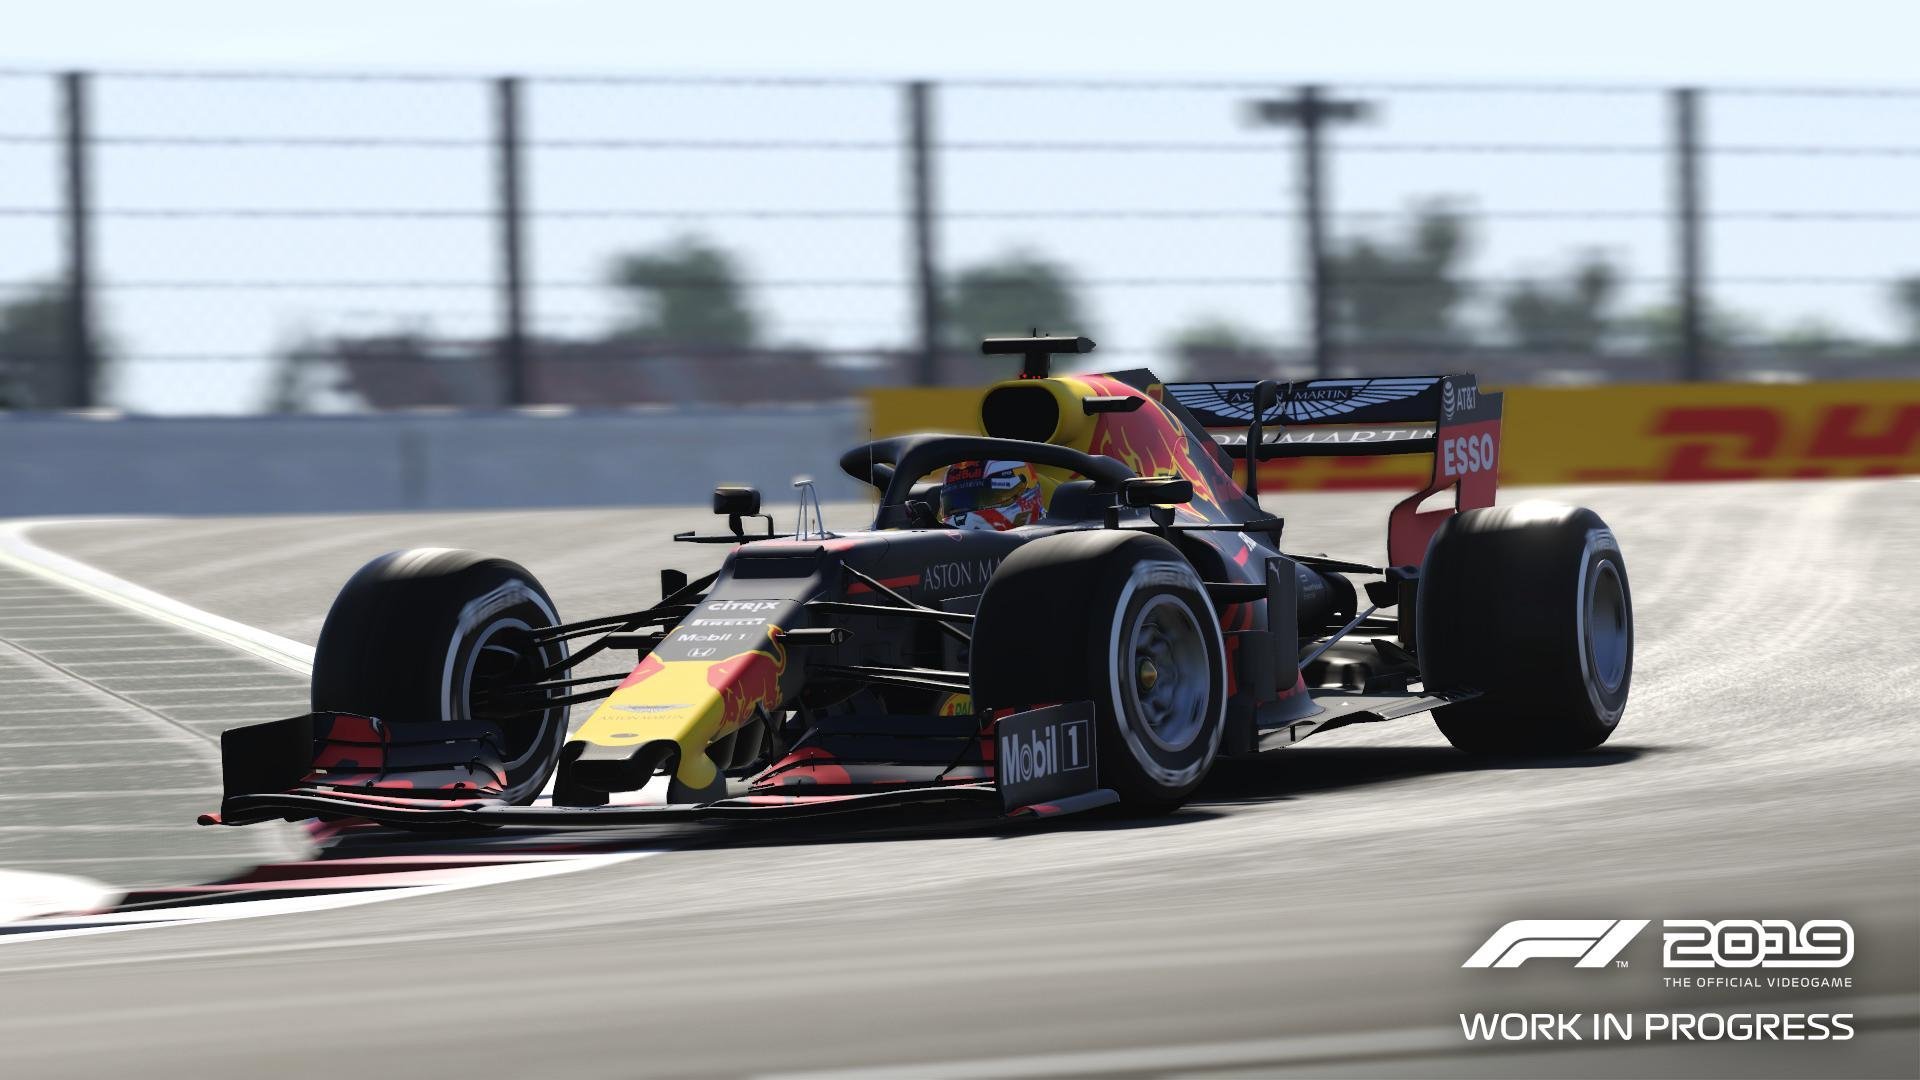 More information about "F1 2019 Codemasters: intervista a Lee Mather, Game Director del gioco"